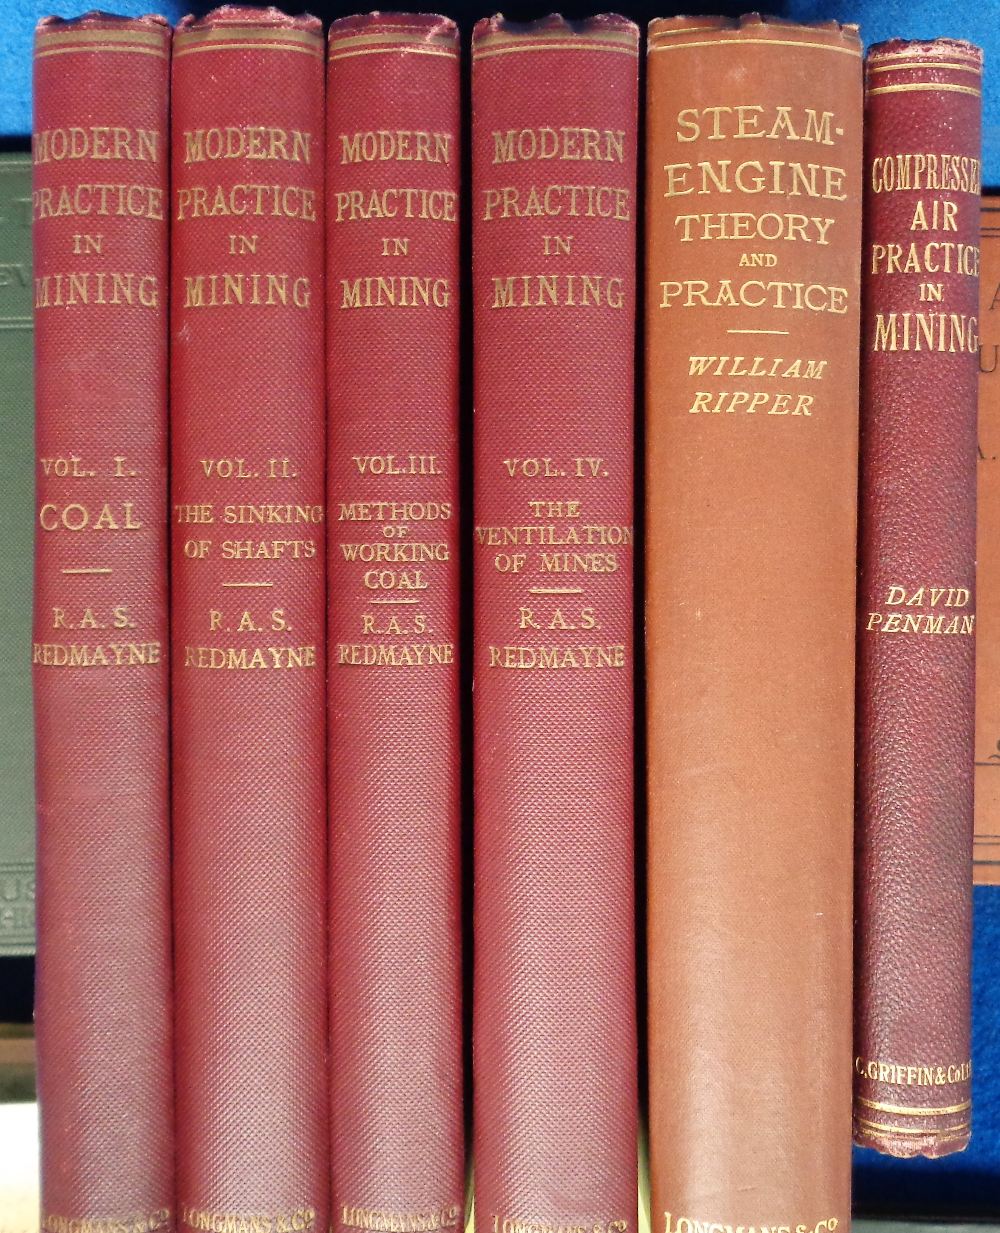 Books, Mining, 11 vintage books to comprise Modern Practice In Mining, R.A.S. Redmayne 4 Vols ( - Image 2 of 2